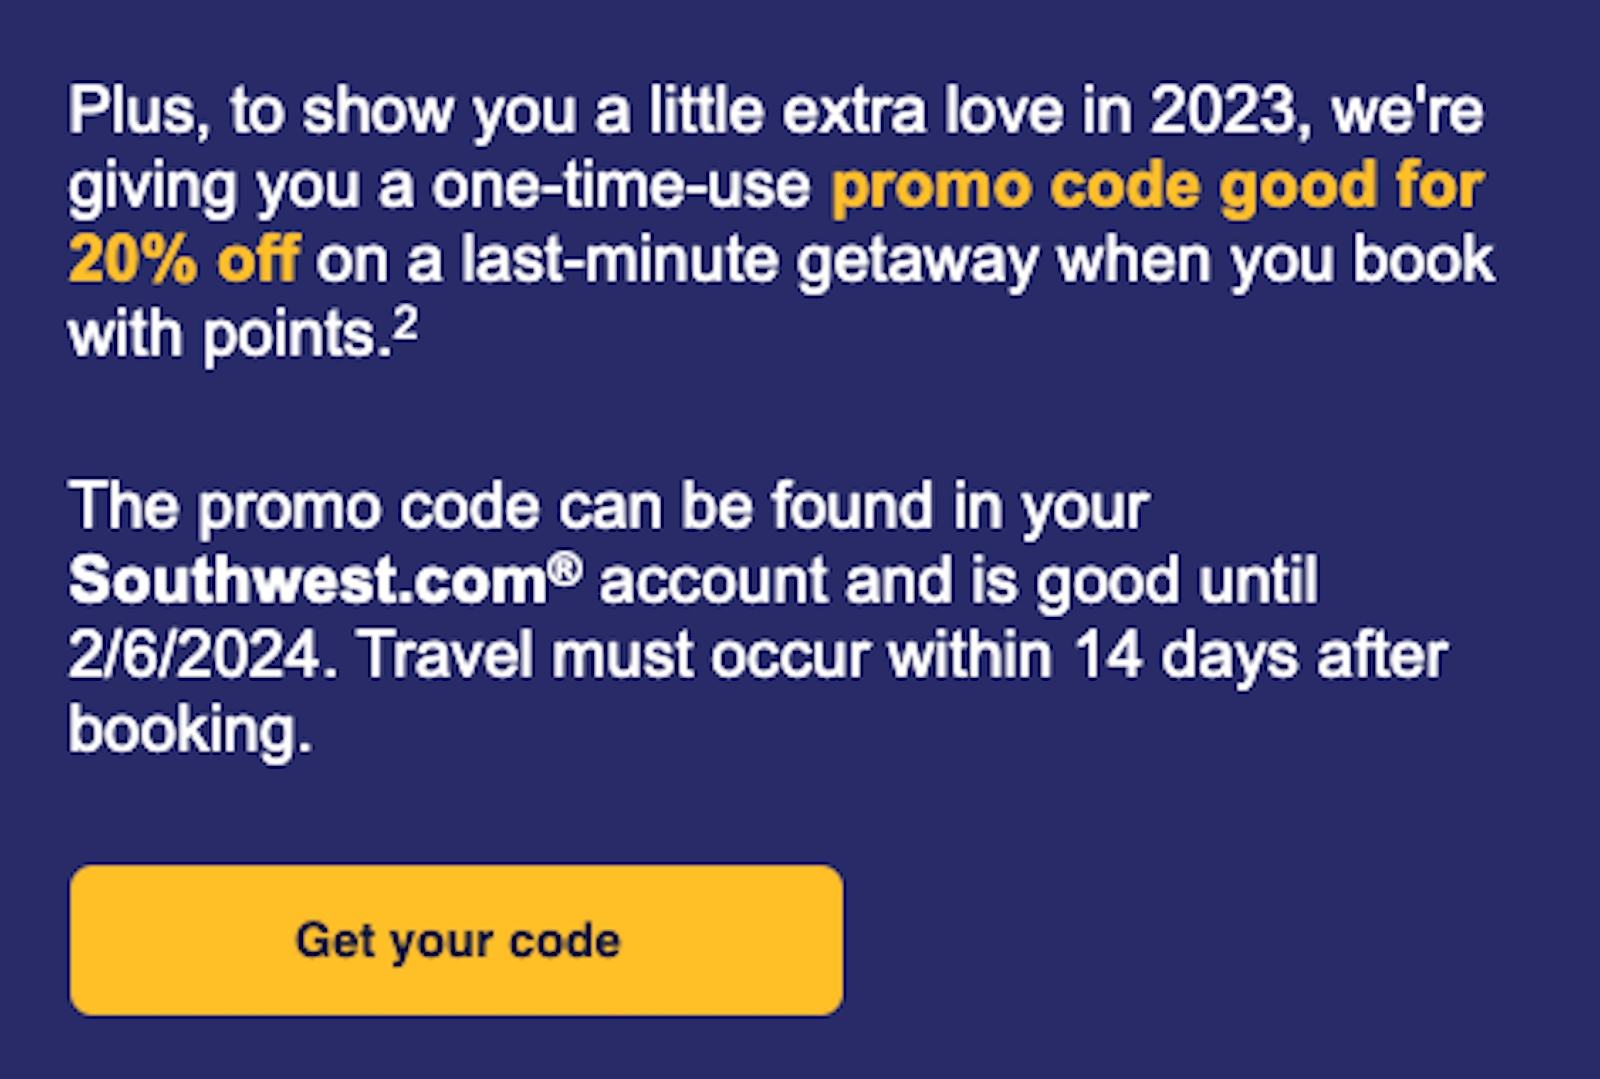 email text offering discount code for a Southwest credit cardholder